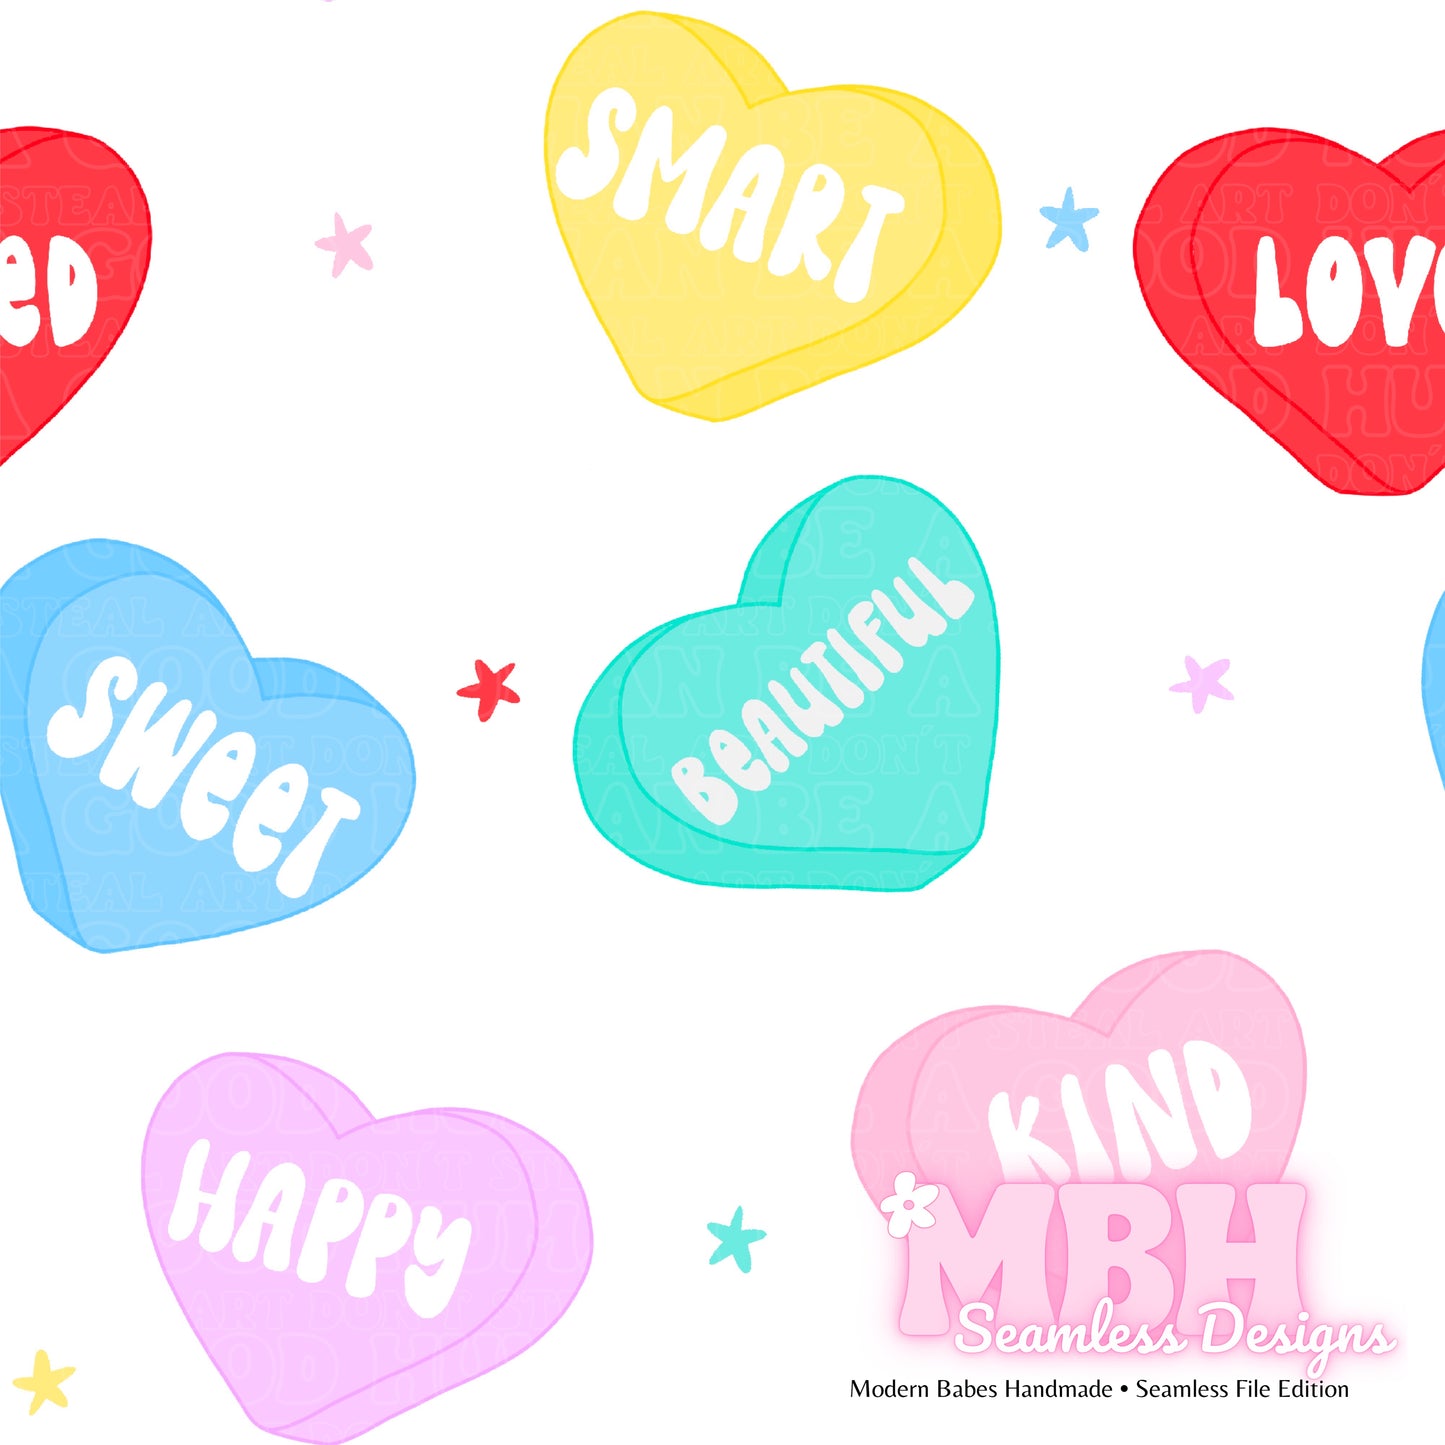 Starry Convo Hearts 2 Colors Seamless Patterns